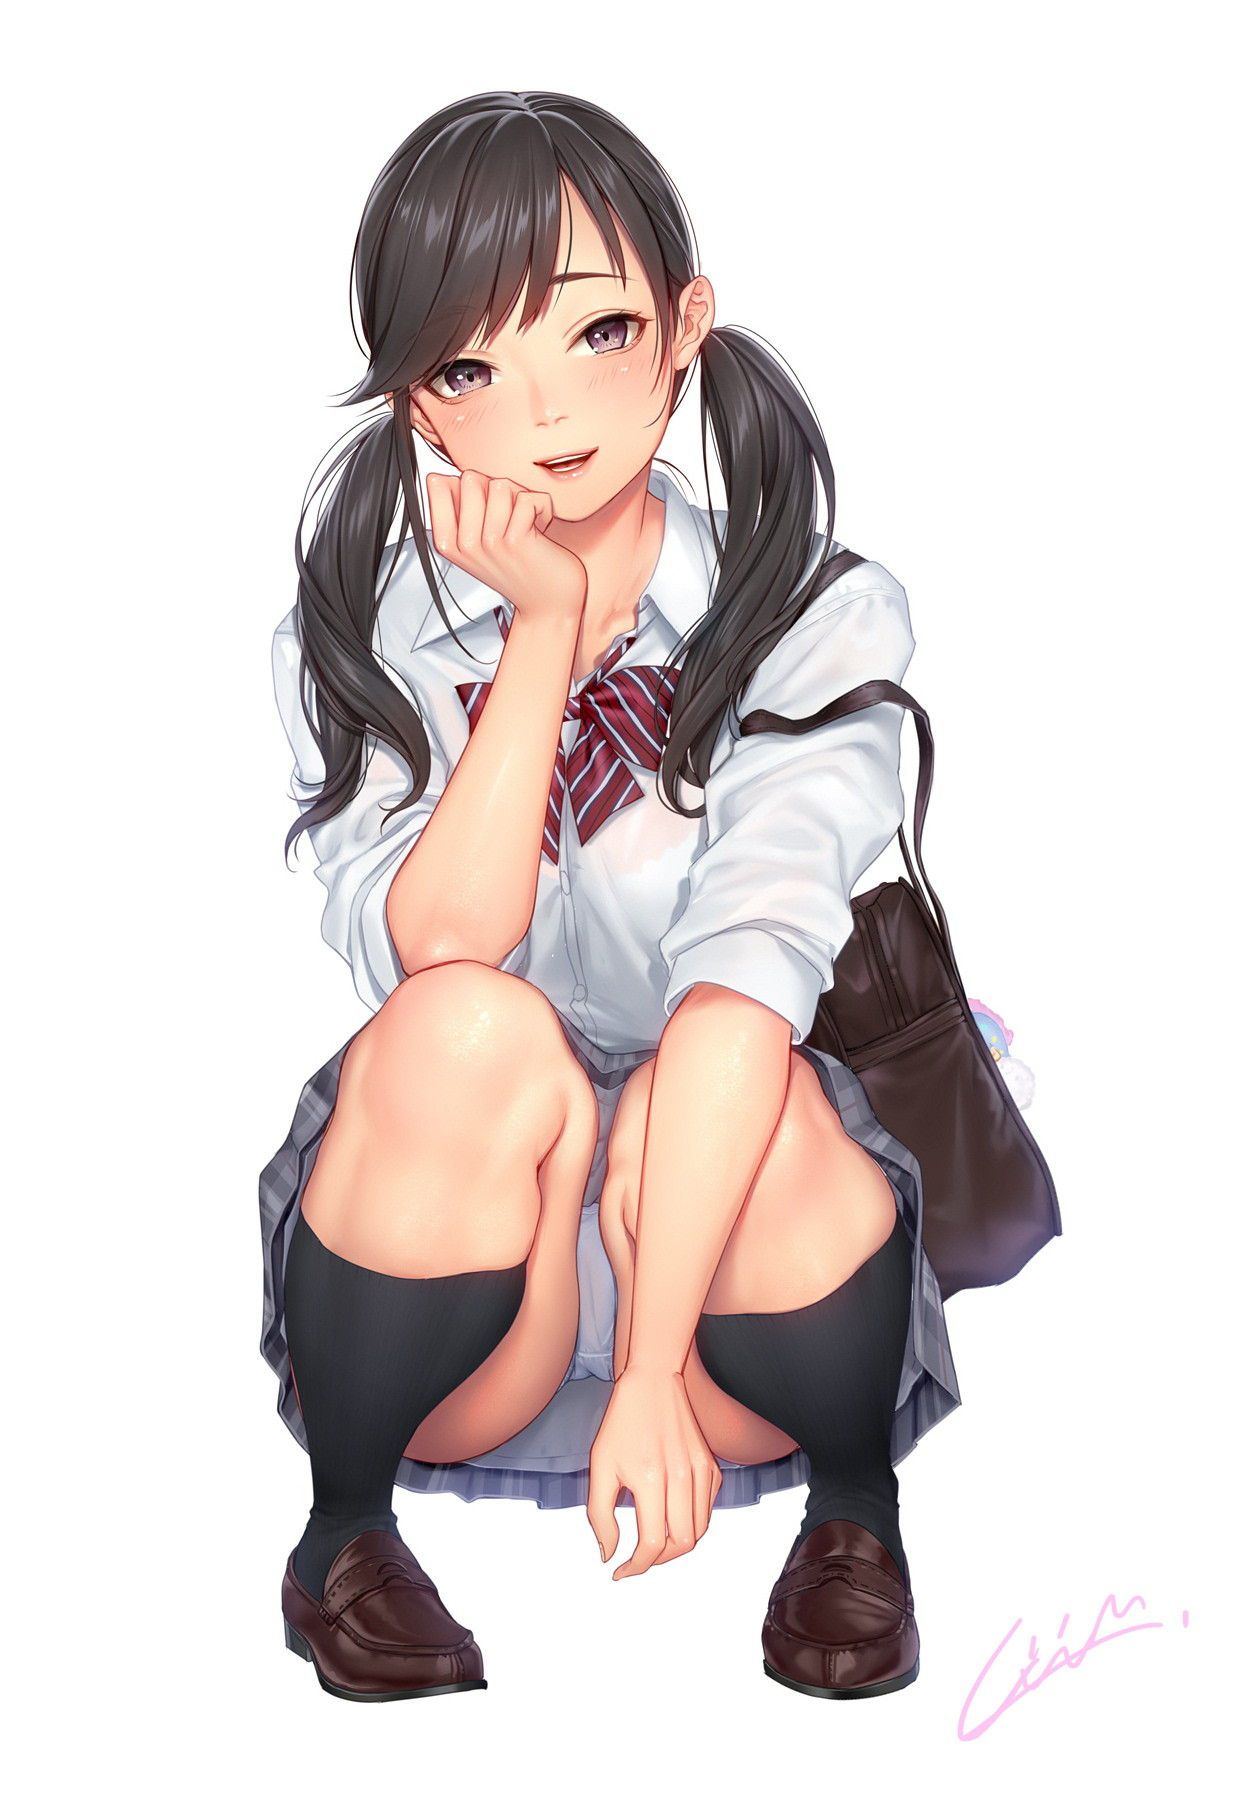 "Where are you looking~?" A soft-looking defenseless crotch image ♪ of a girl squatting with her eyes 19